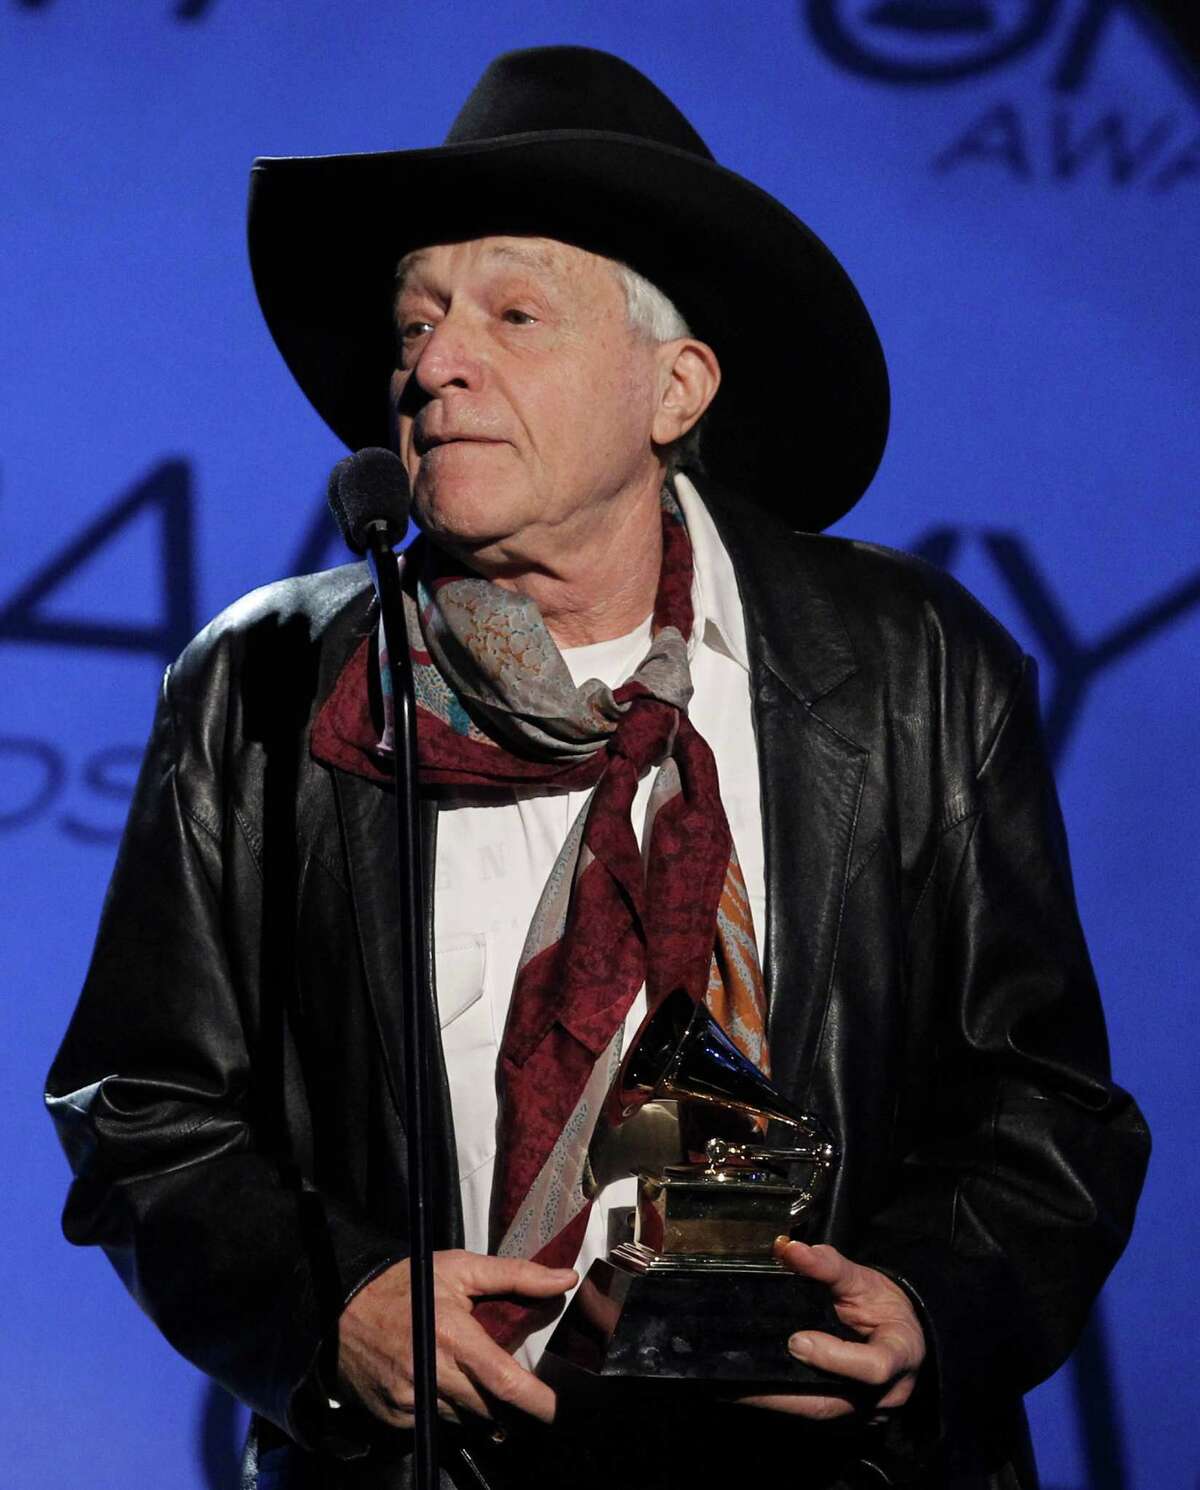 FILE - In this Sunday, Jan. 31, 2010 file photo, Ramblin' Jack Elliott accepts the award for traditional blues album for "A Stranger Here" at the Grammy Awards in Los Angeles. The revitalized Newport Folk Festival continues to expand as younger fans discover old folk stars like Elliott. (AP Photo/Matt Sayles, File) ORG XMIT: BX804